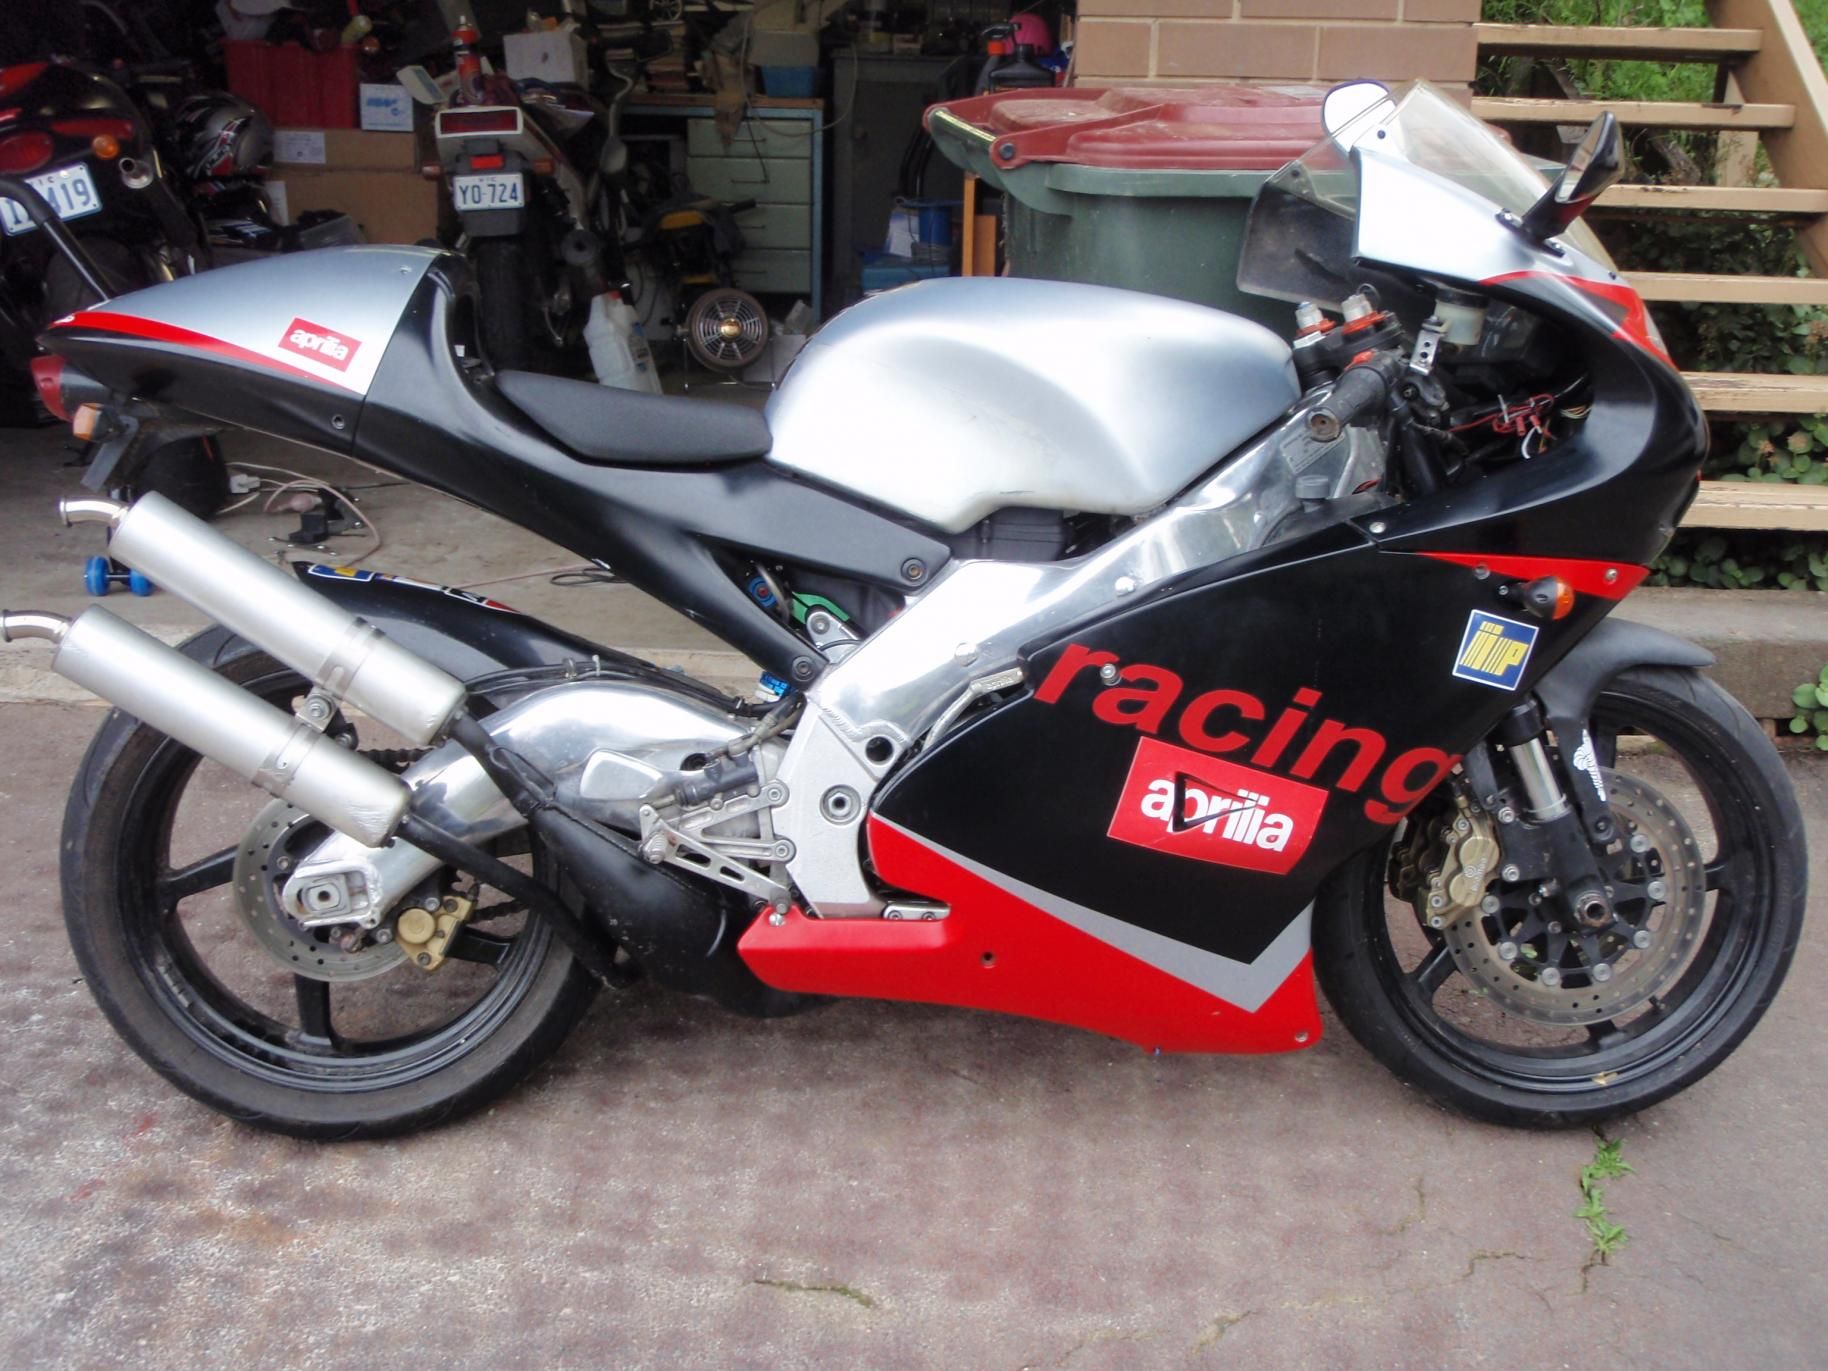 Aprilia RS250 parked on the road